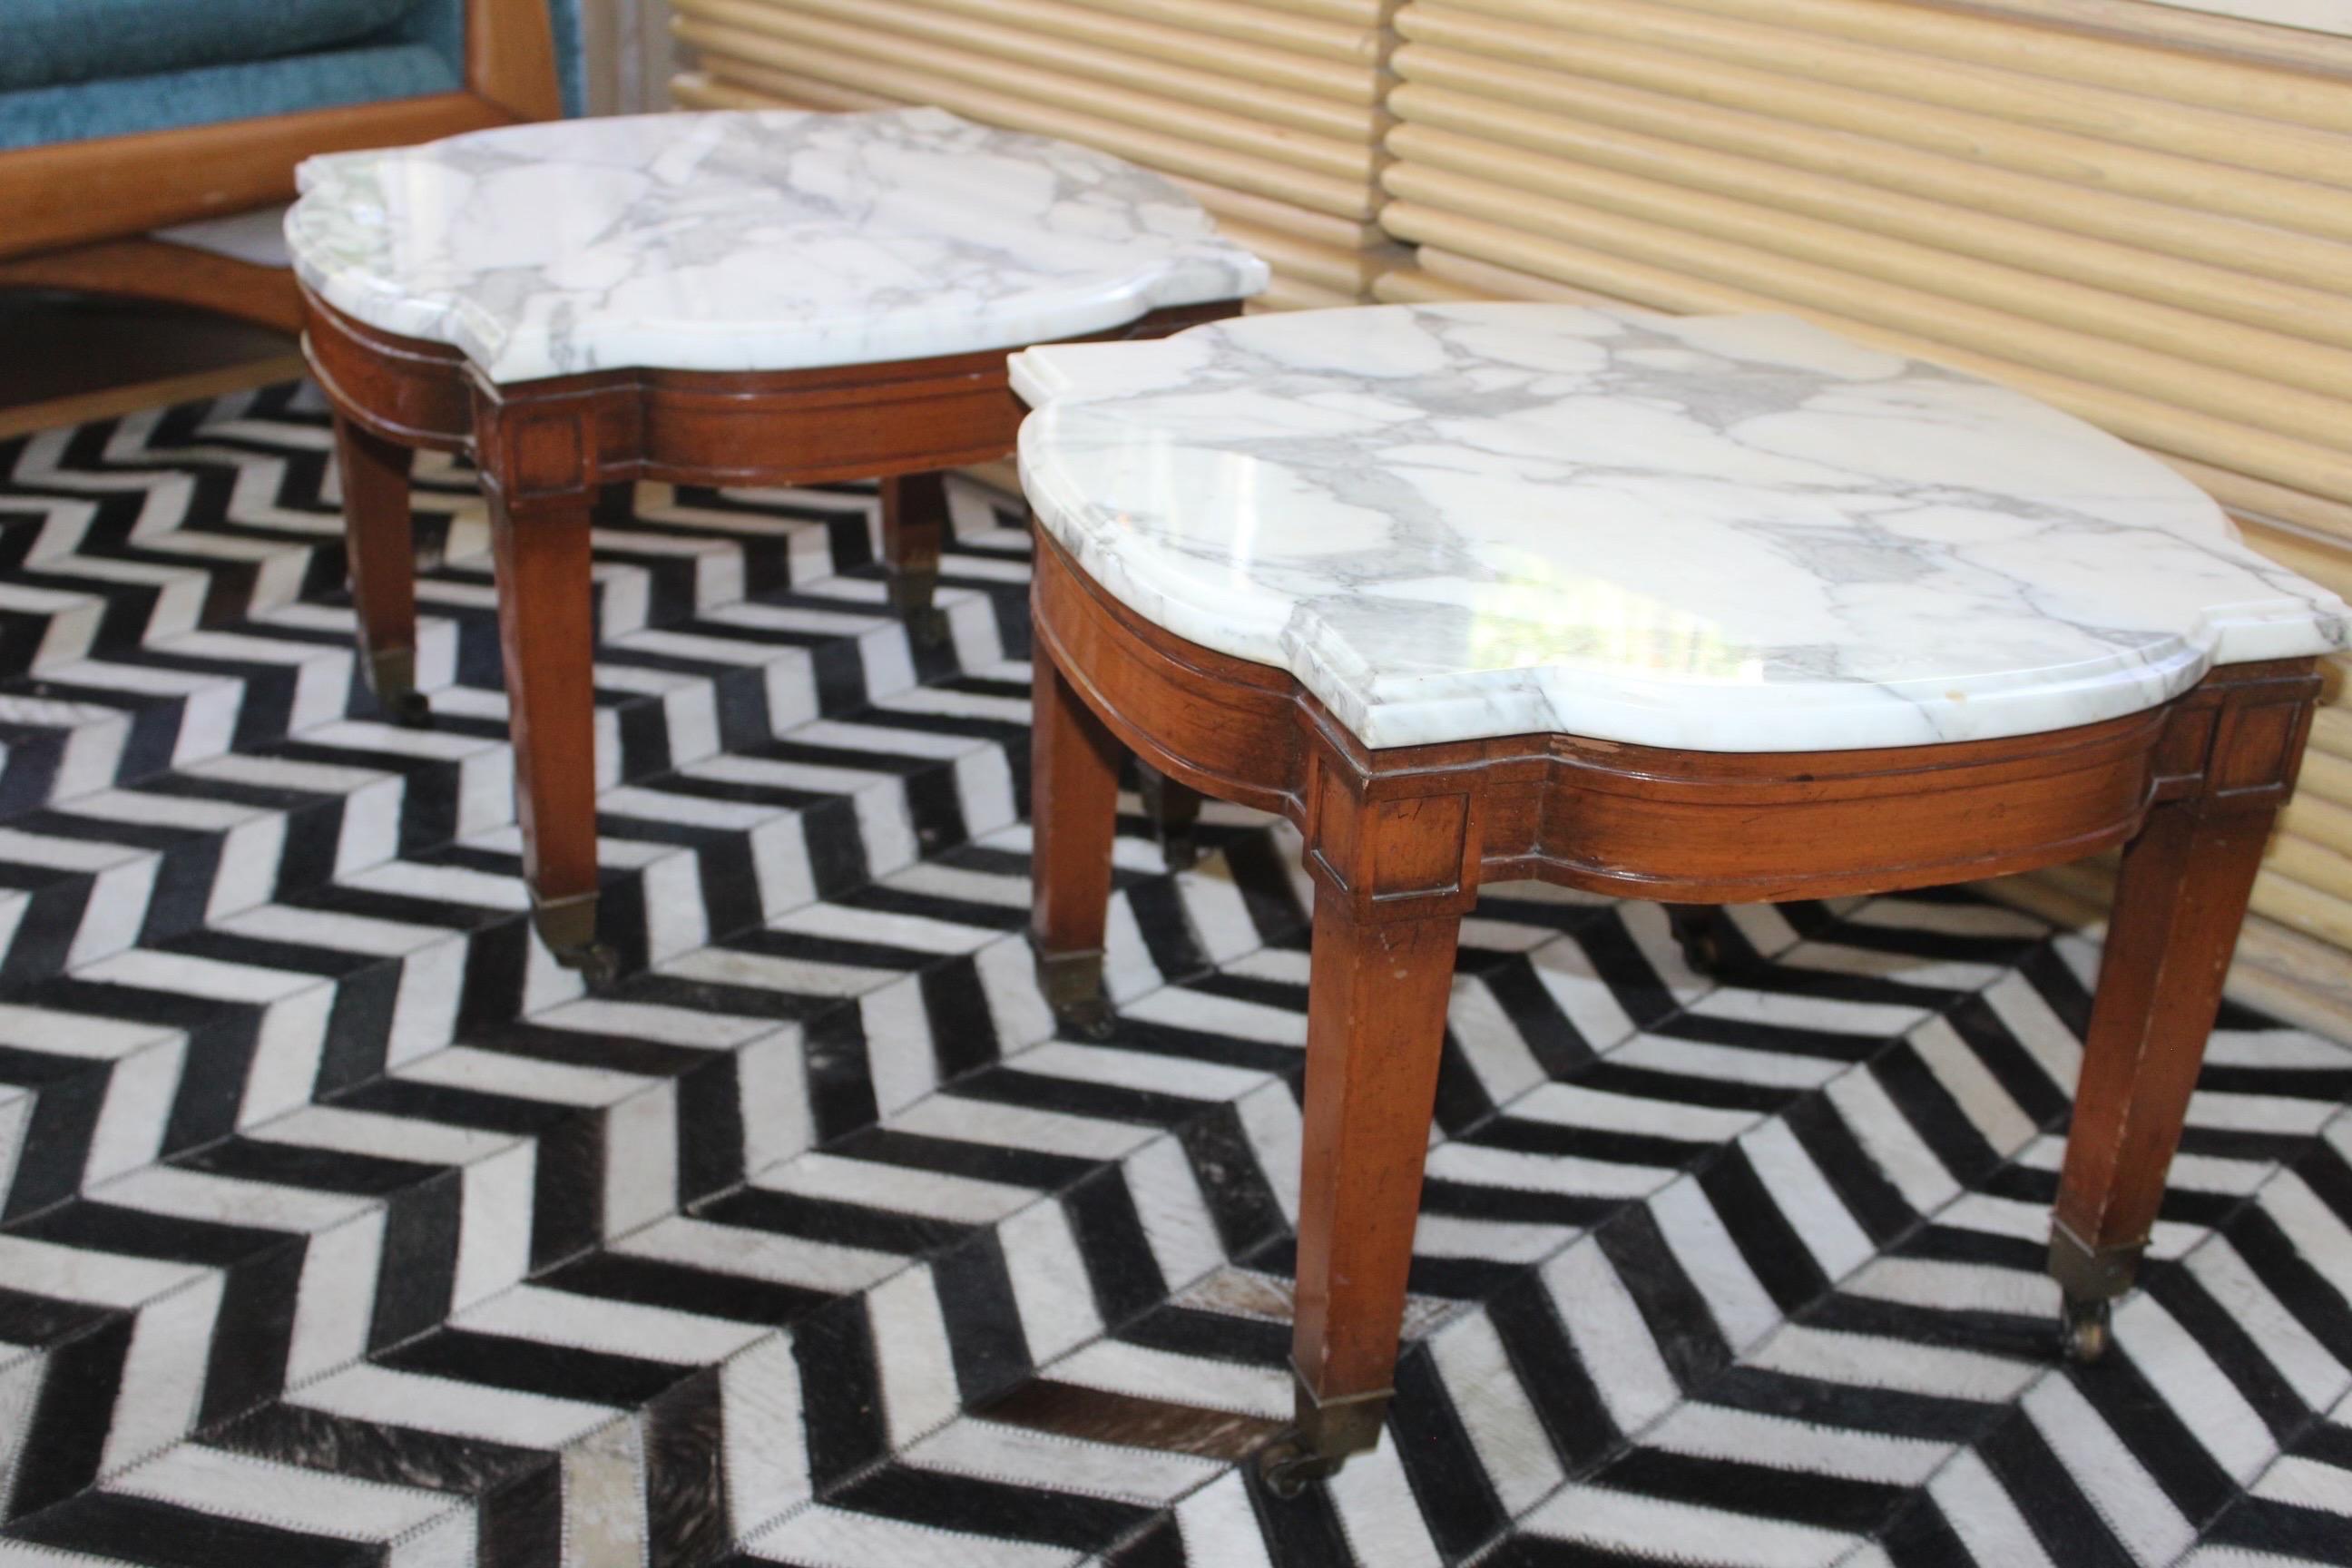 Pair of elegant 1950’s Regency Mahogany Side Tables on brass casters. Obtains original oragami shaped Carerra Italian marble . Marble top removable for easy transport.